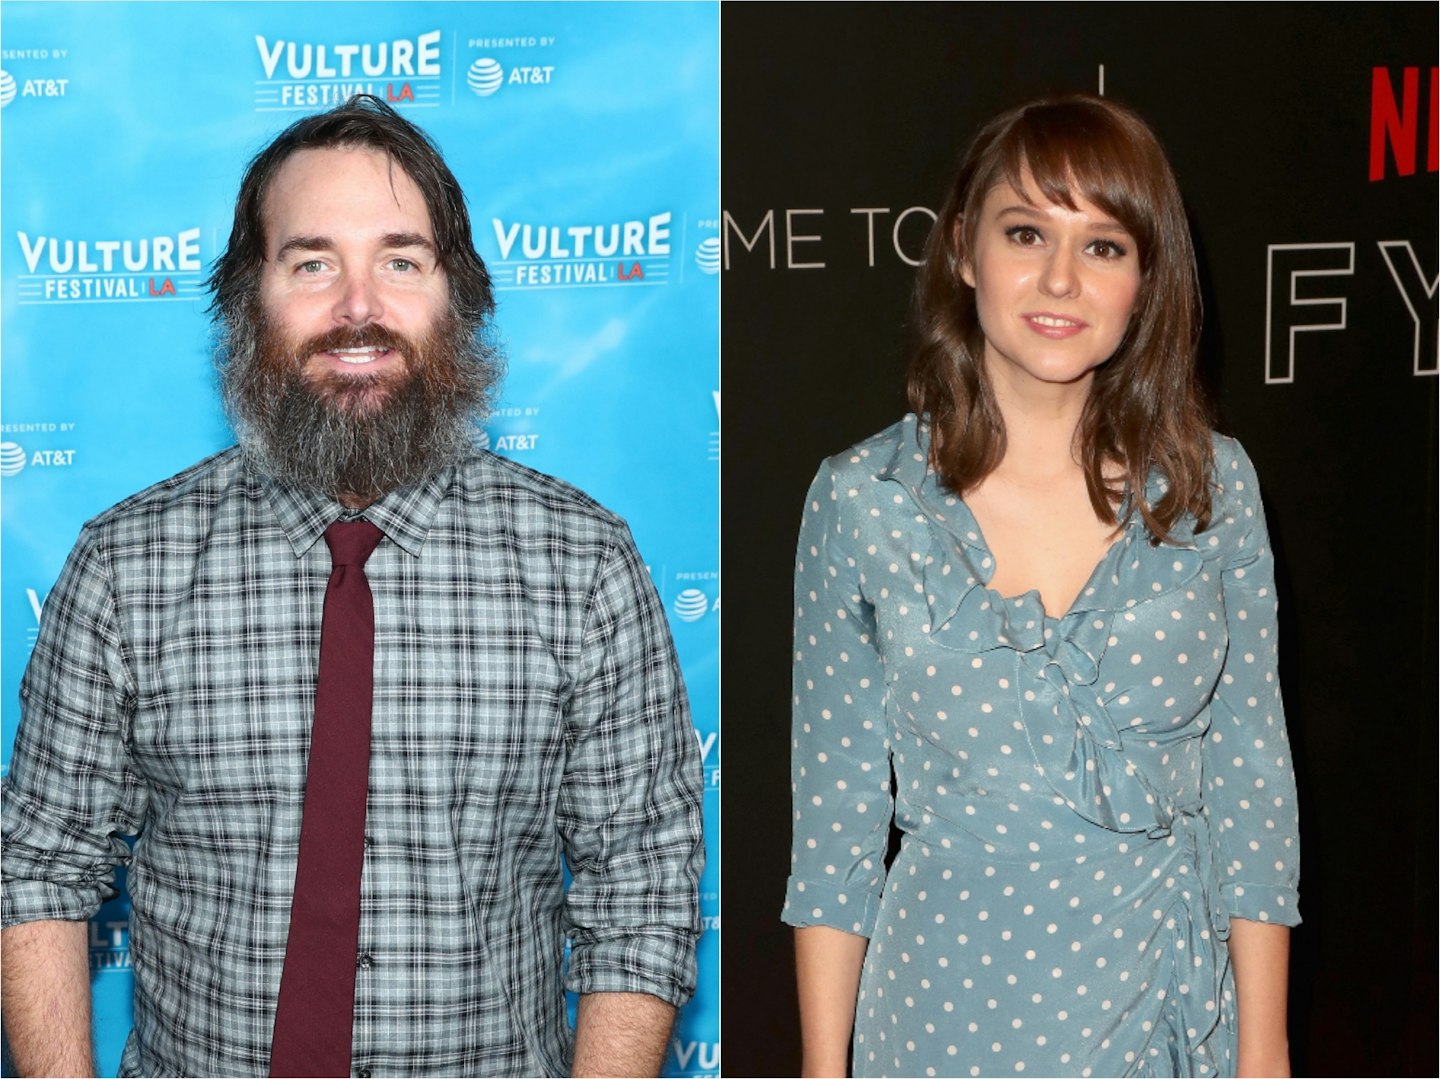 Will Forte and Claudia O'Doherty